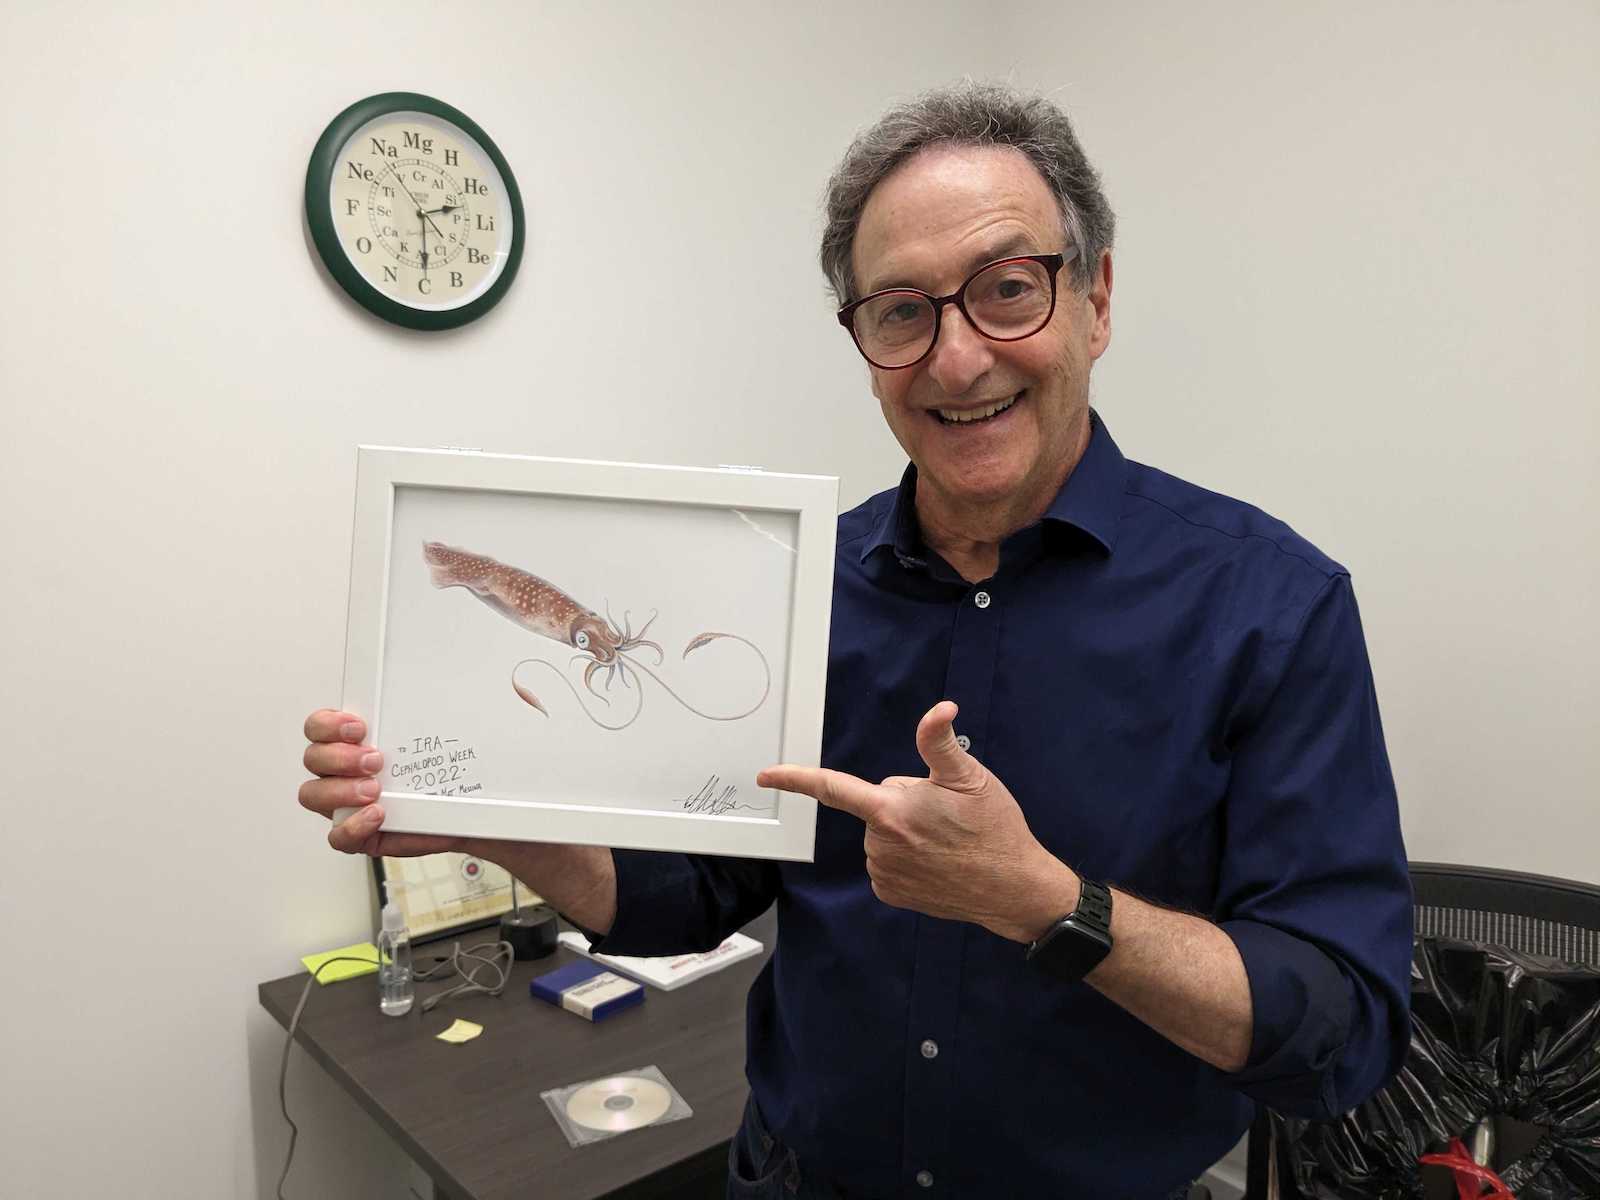 Ira Flatow holding up a colored pencil drawing of a squid.